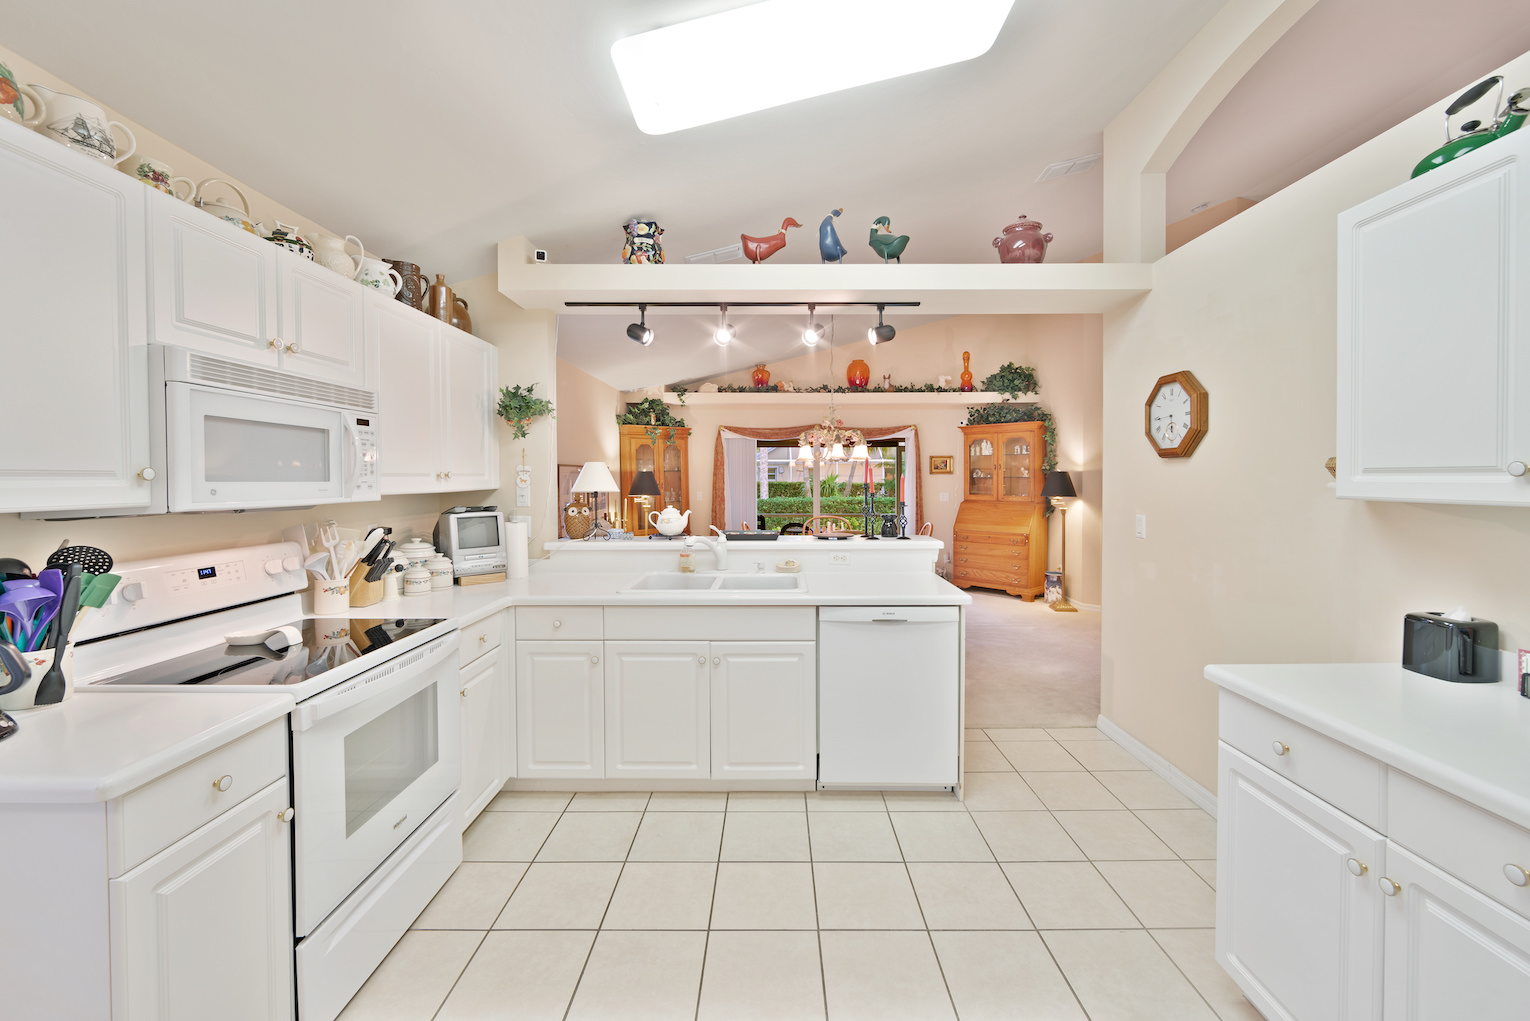 13340 Queen Palm Run, North Fort Myers